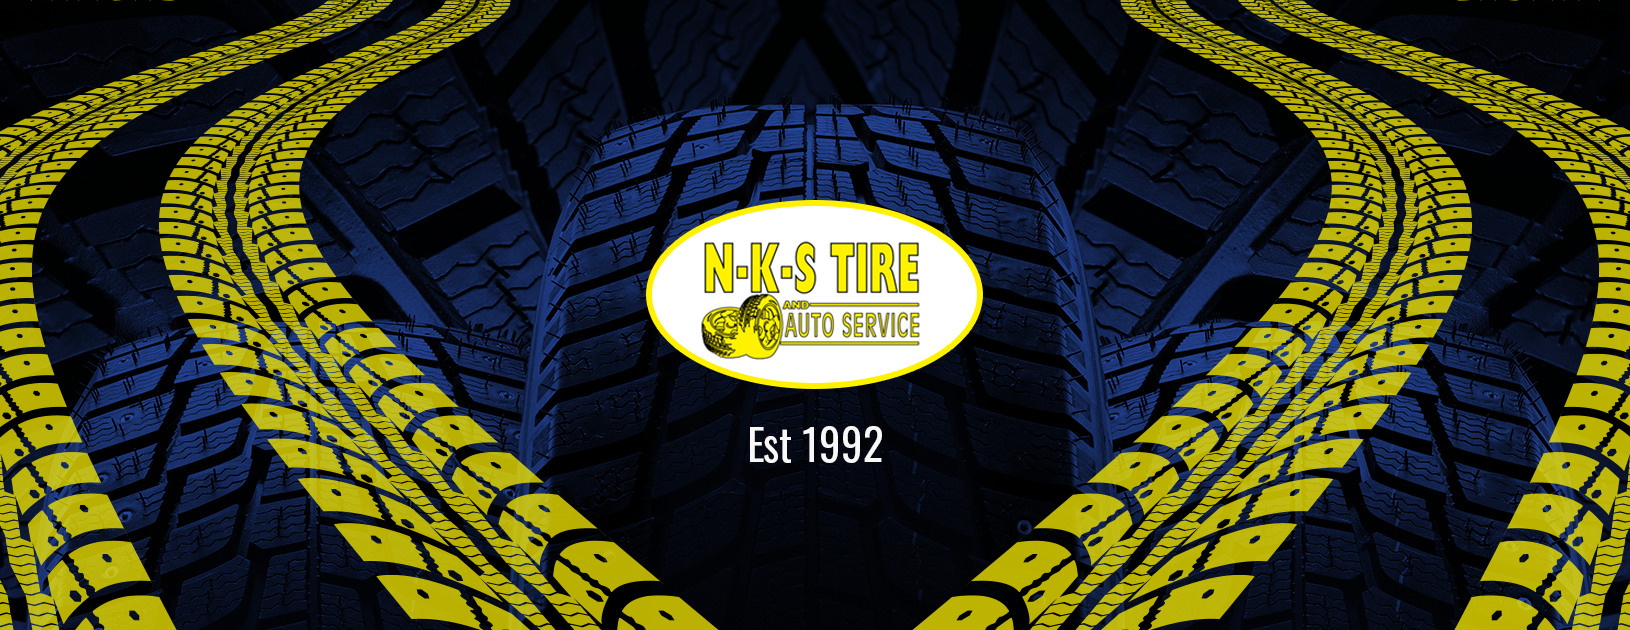 NKS Tire and Auto Service